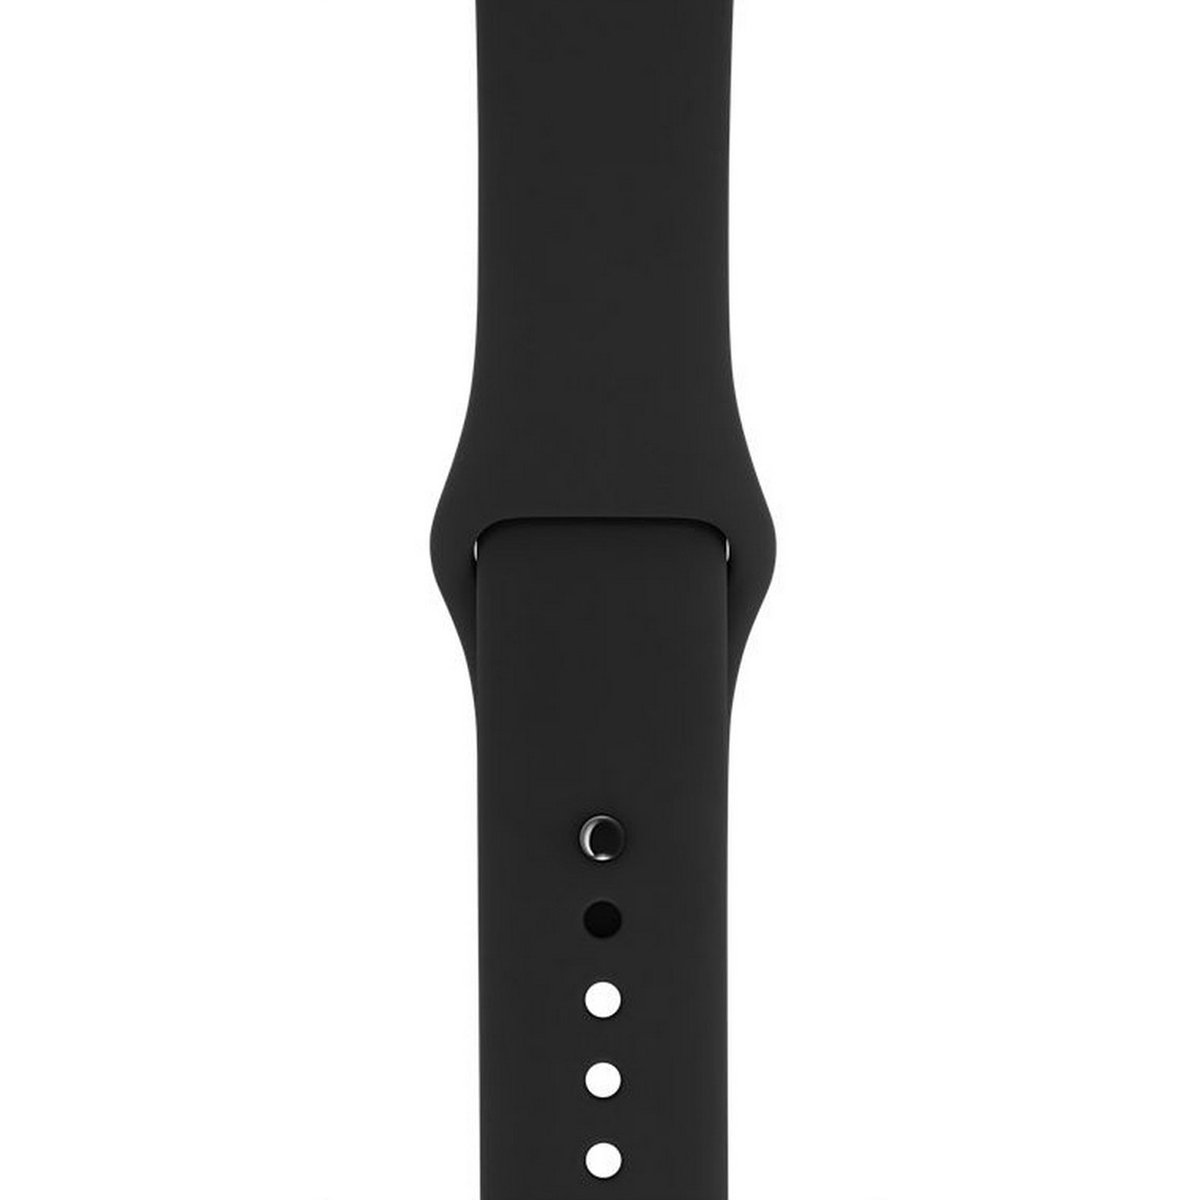 Apple Watch MP032 42mm Space Gray Aluminum Case With Black Sport Band